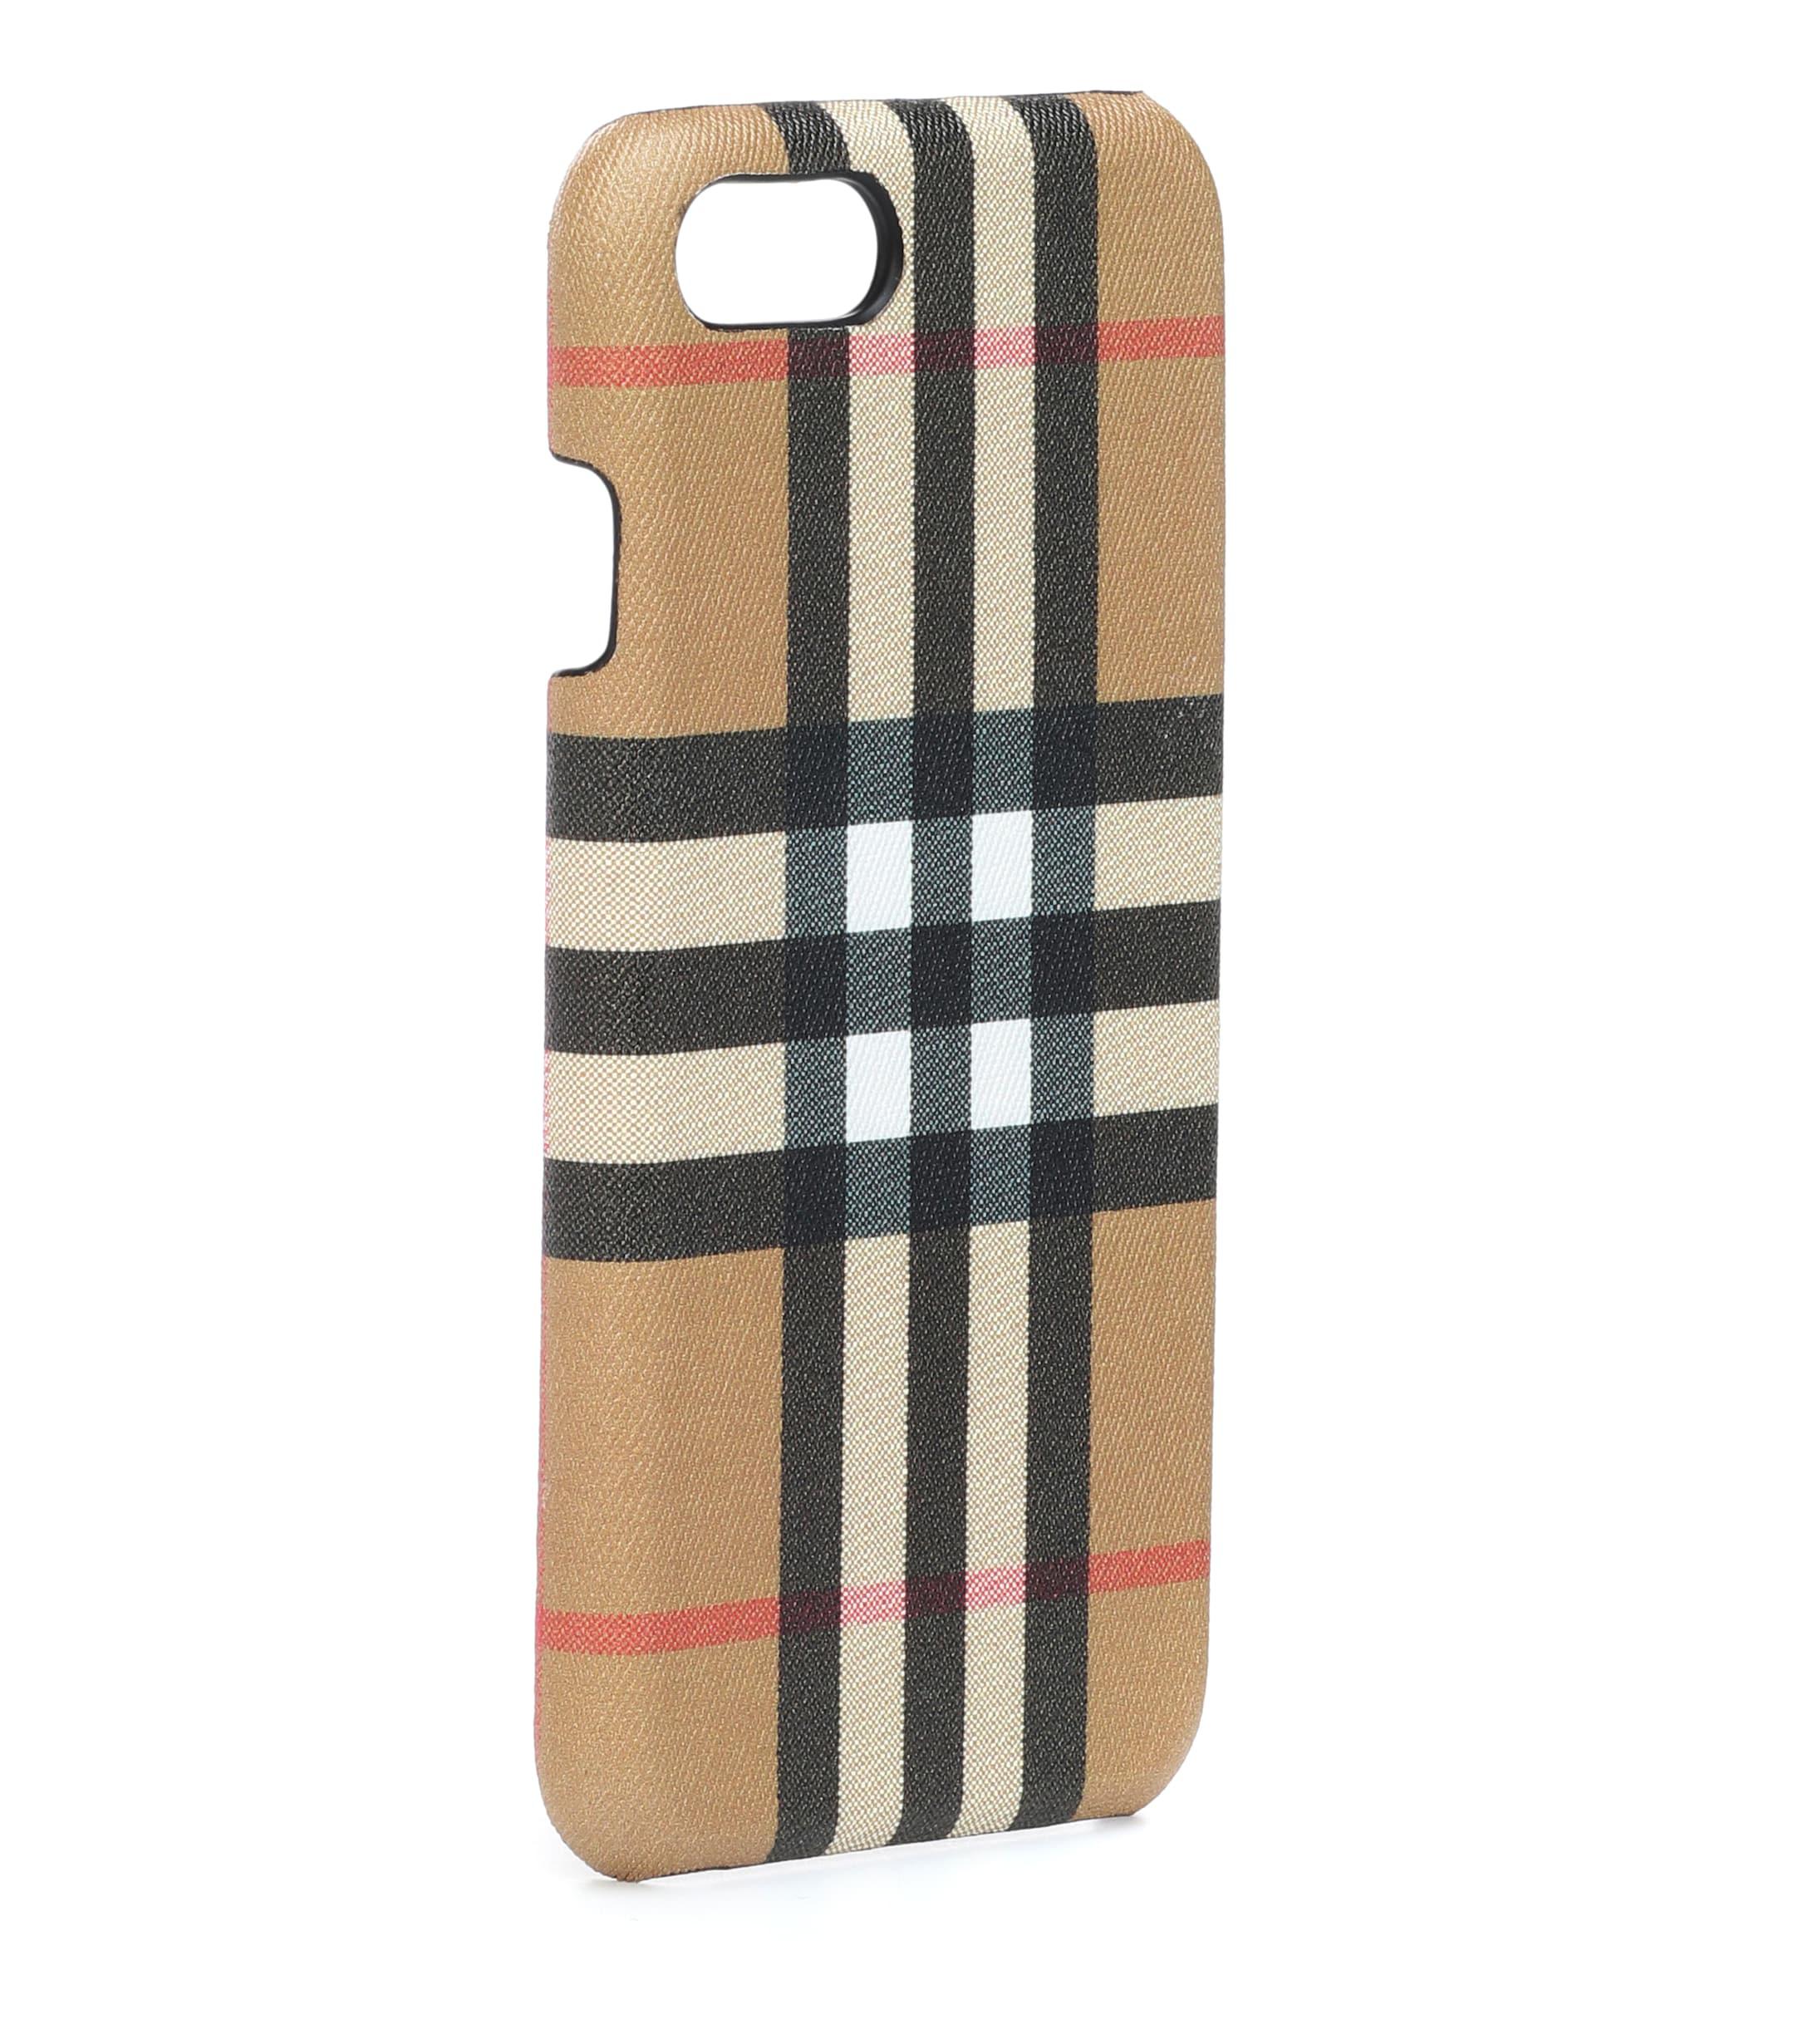 Burberry Iphone Cover Flash Sales, 51% OFF | www.propellermadrid.com